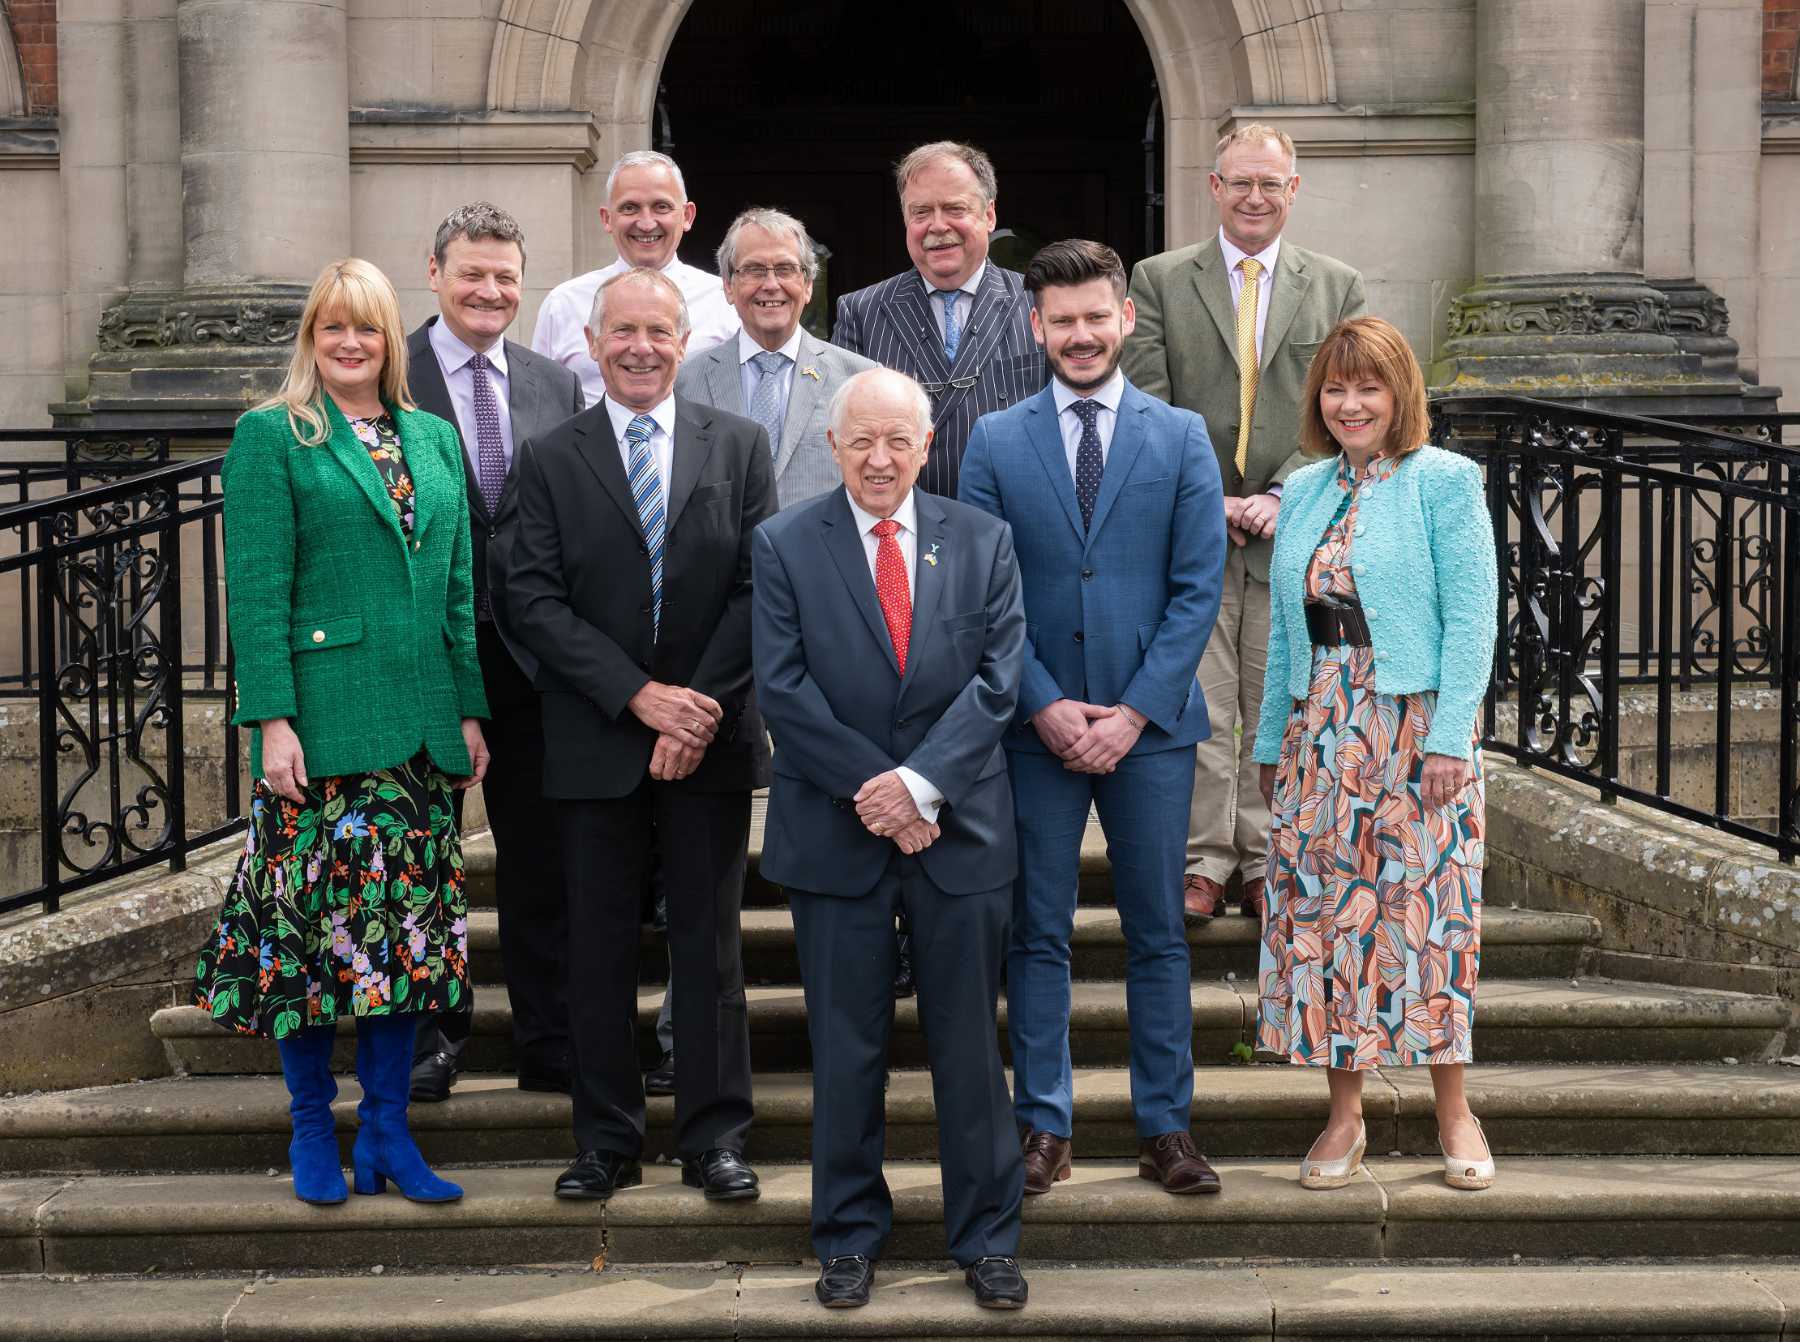 North Yorkshire County Council’s new executive on the steps of County Hall in Northallerton. Back row, from left to right, Cllr Greg White, Cllr Michael Harrison, Cllr David Chance, Cllr Simon Myers and Cllr Gareth Dadd. Front row, left to right, Cllr Annabel Wilkinson, Cllr Derek Bastiman, Cllr Carl Les, Cllr Keane Duncan and Cllr Janet Sanderson